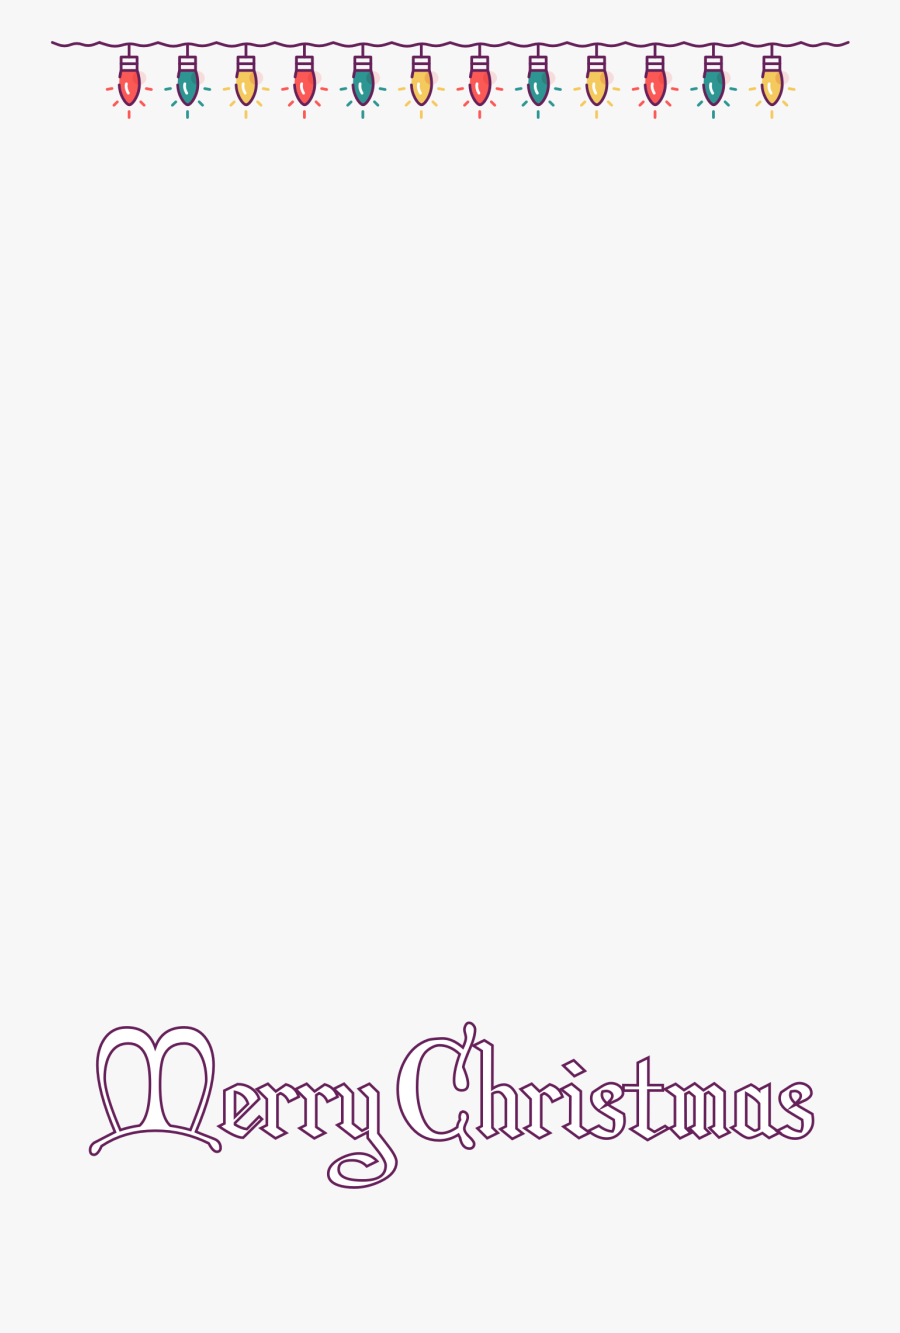 Christmas Lights Border Png - Calligraphy, Transparent Clipart